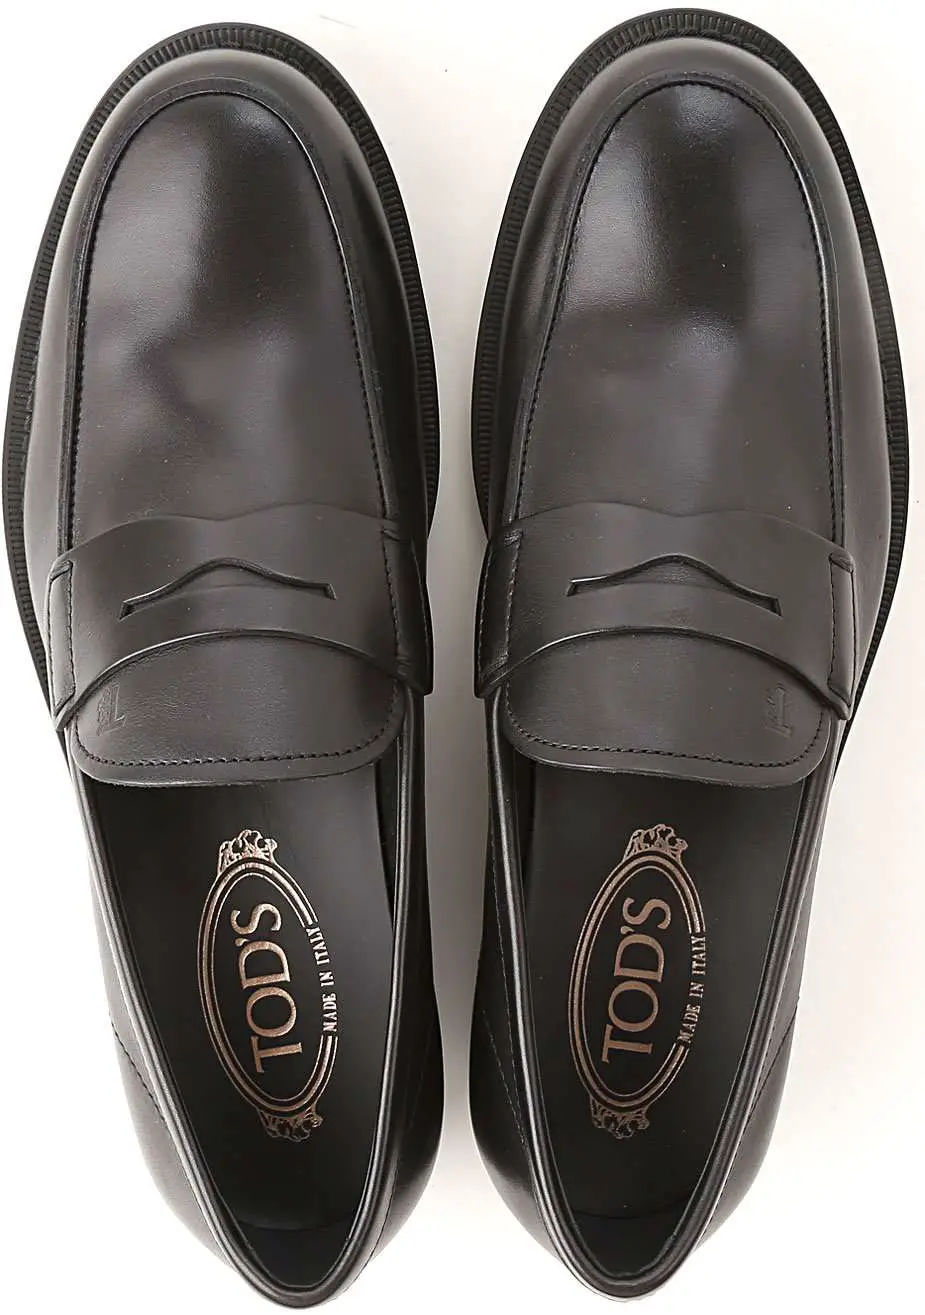 Mens Shoes Tods, Style code: xxm0ud00640d90b999